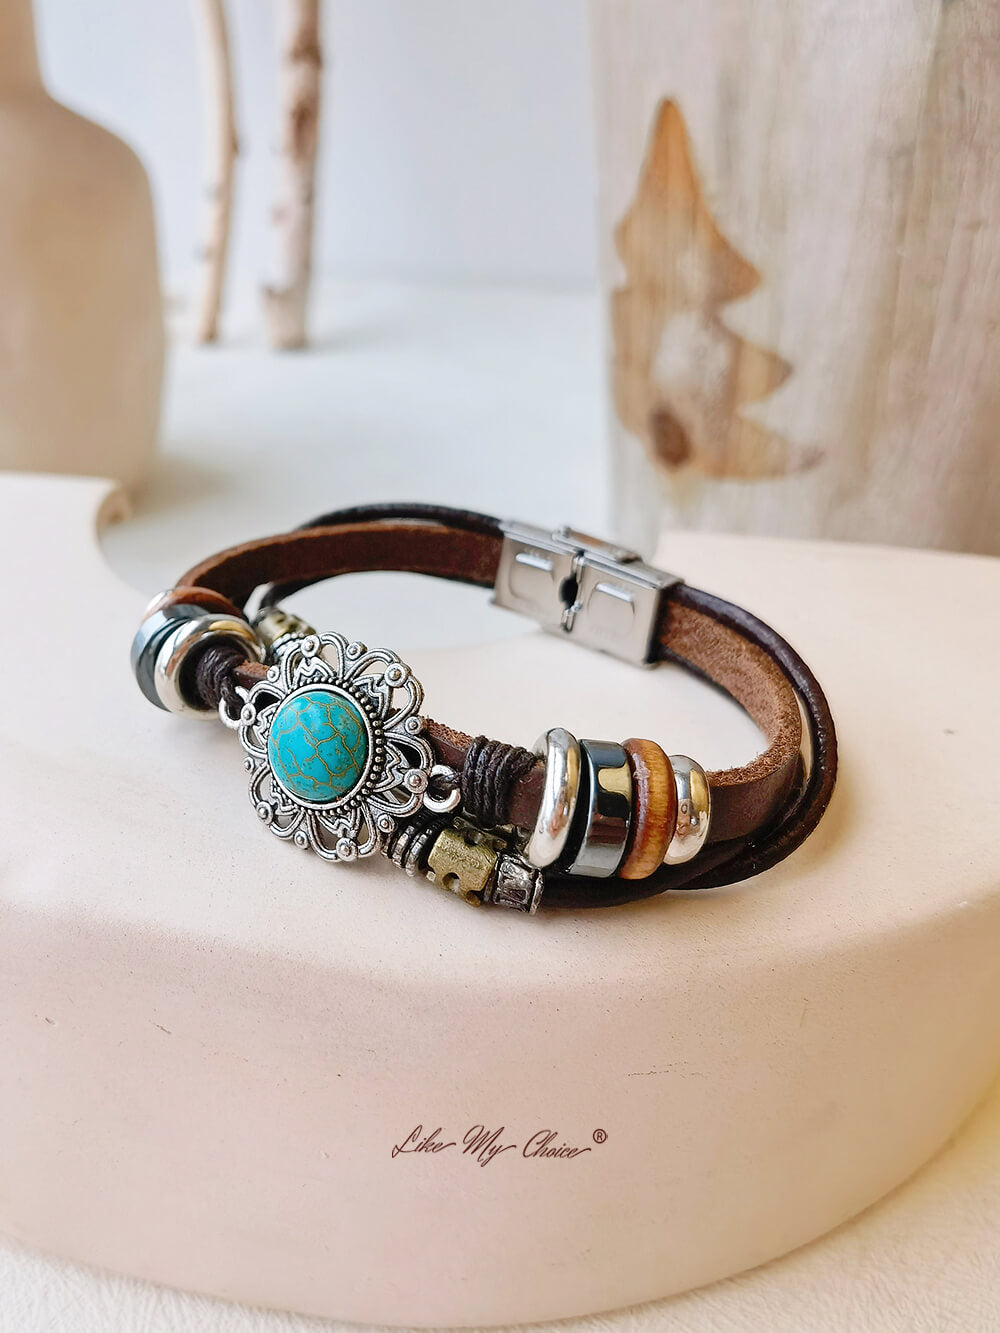 Bohemian Ethnic Turquoise Bracelet  Leather Chain and Totem Element